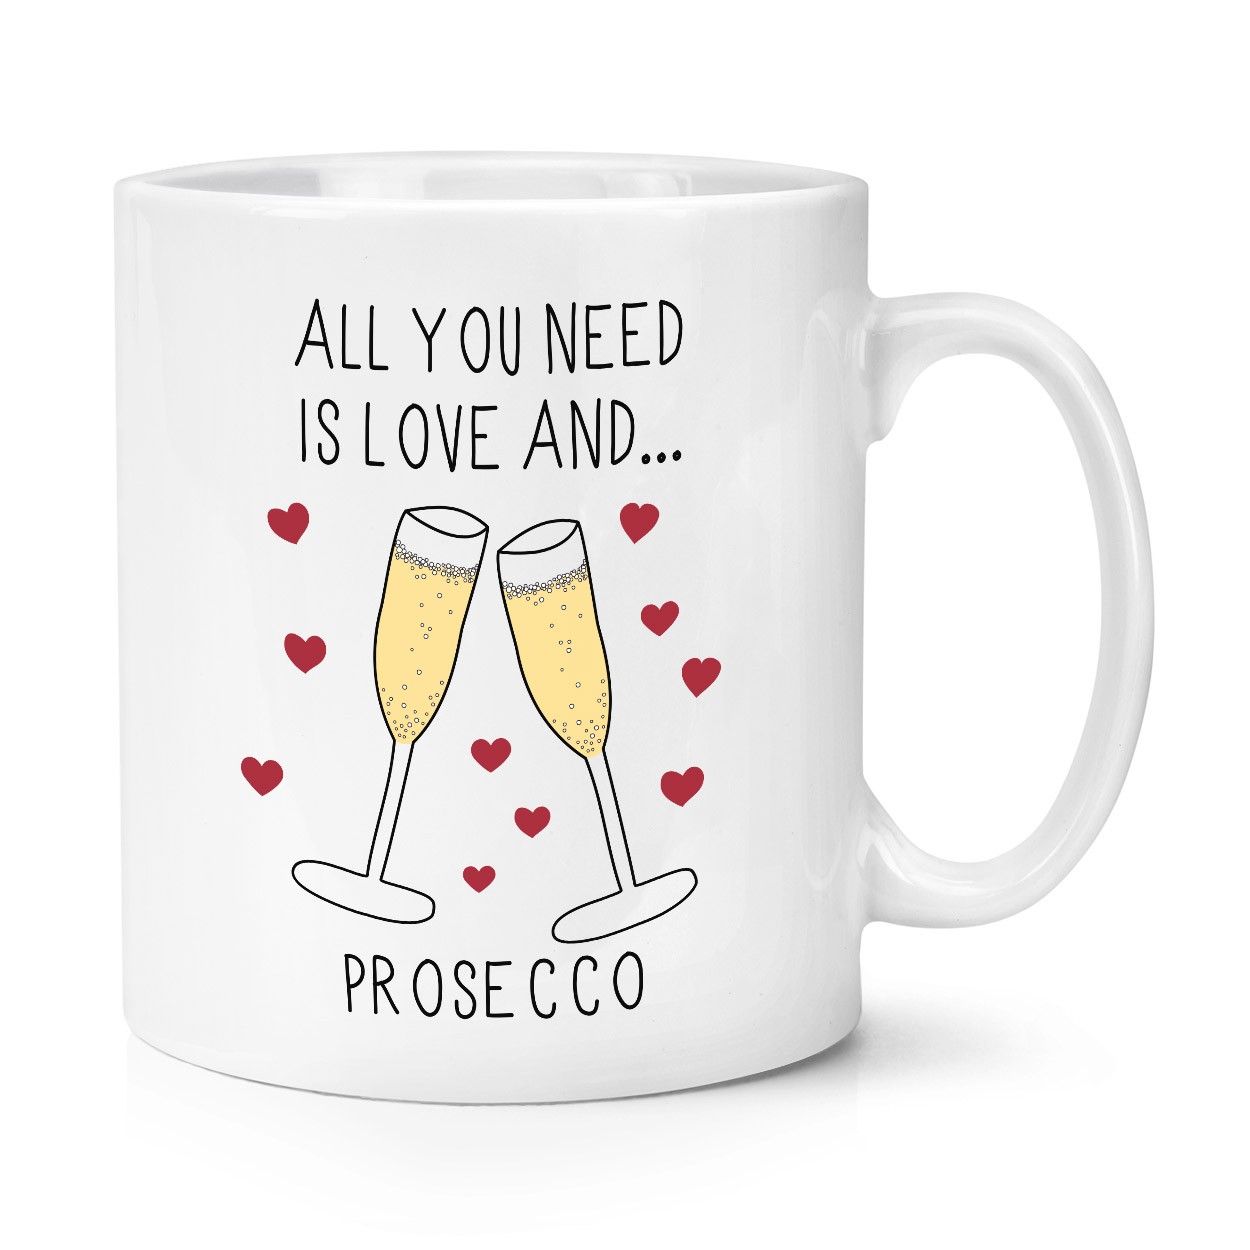 All You Need Is Love And Prosecco 10oz Mug Cup